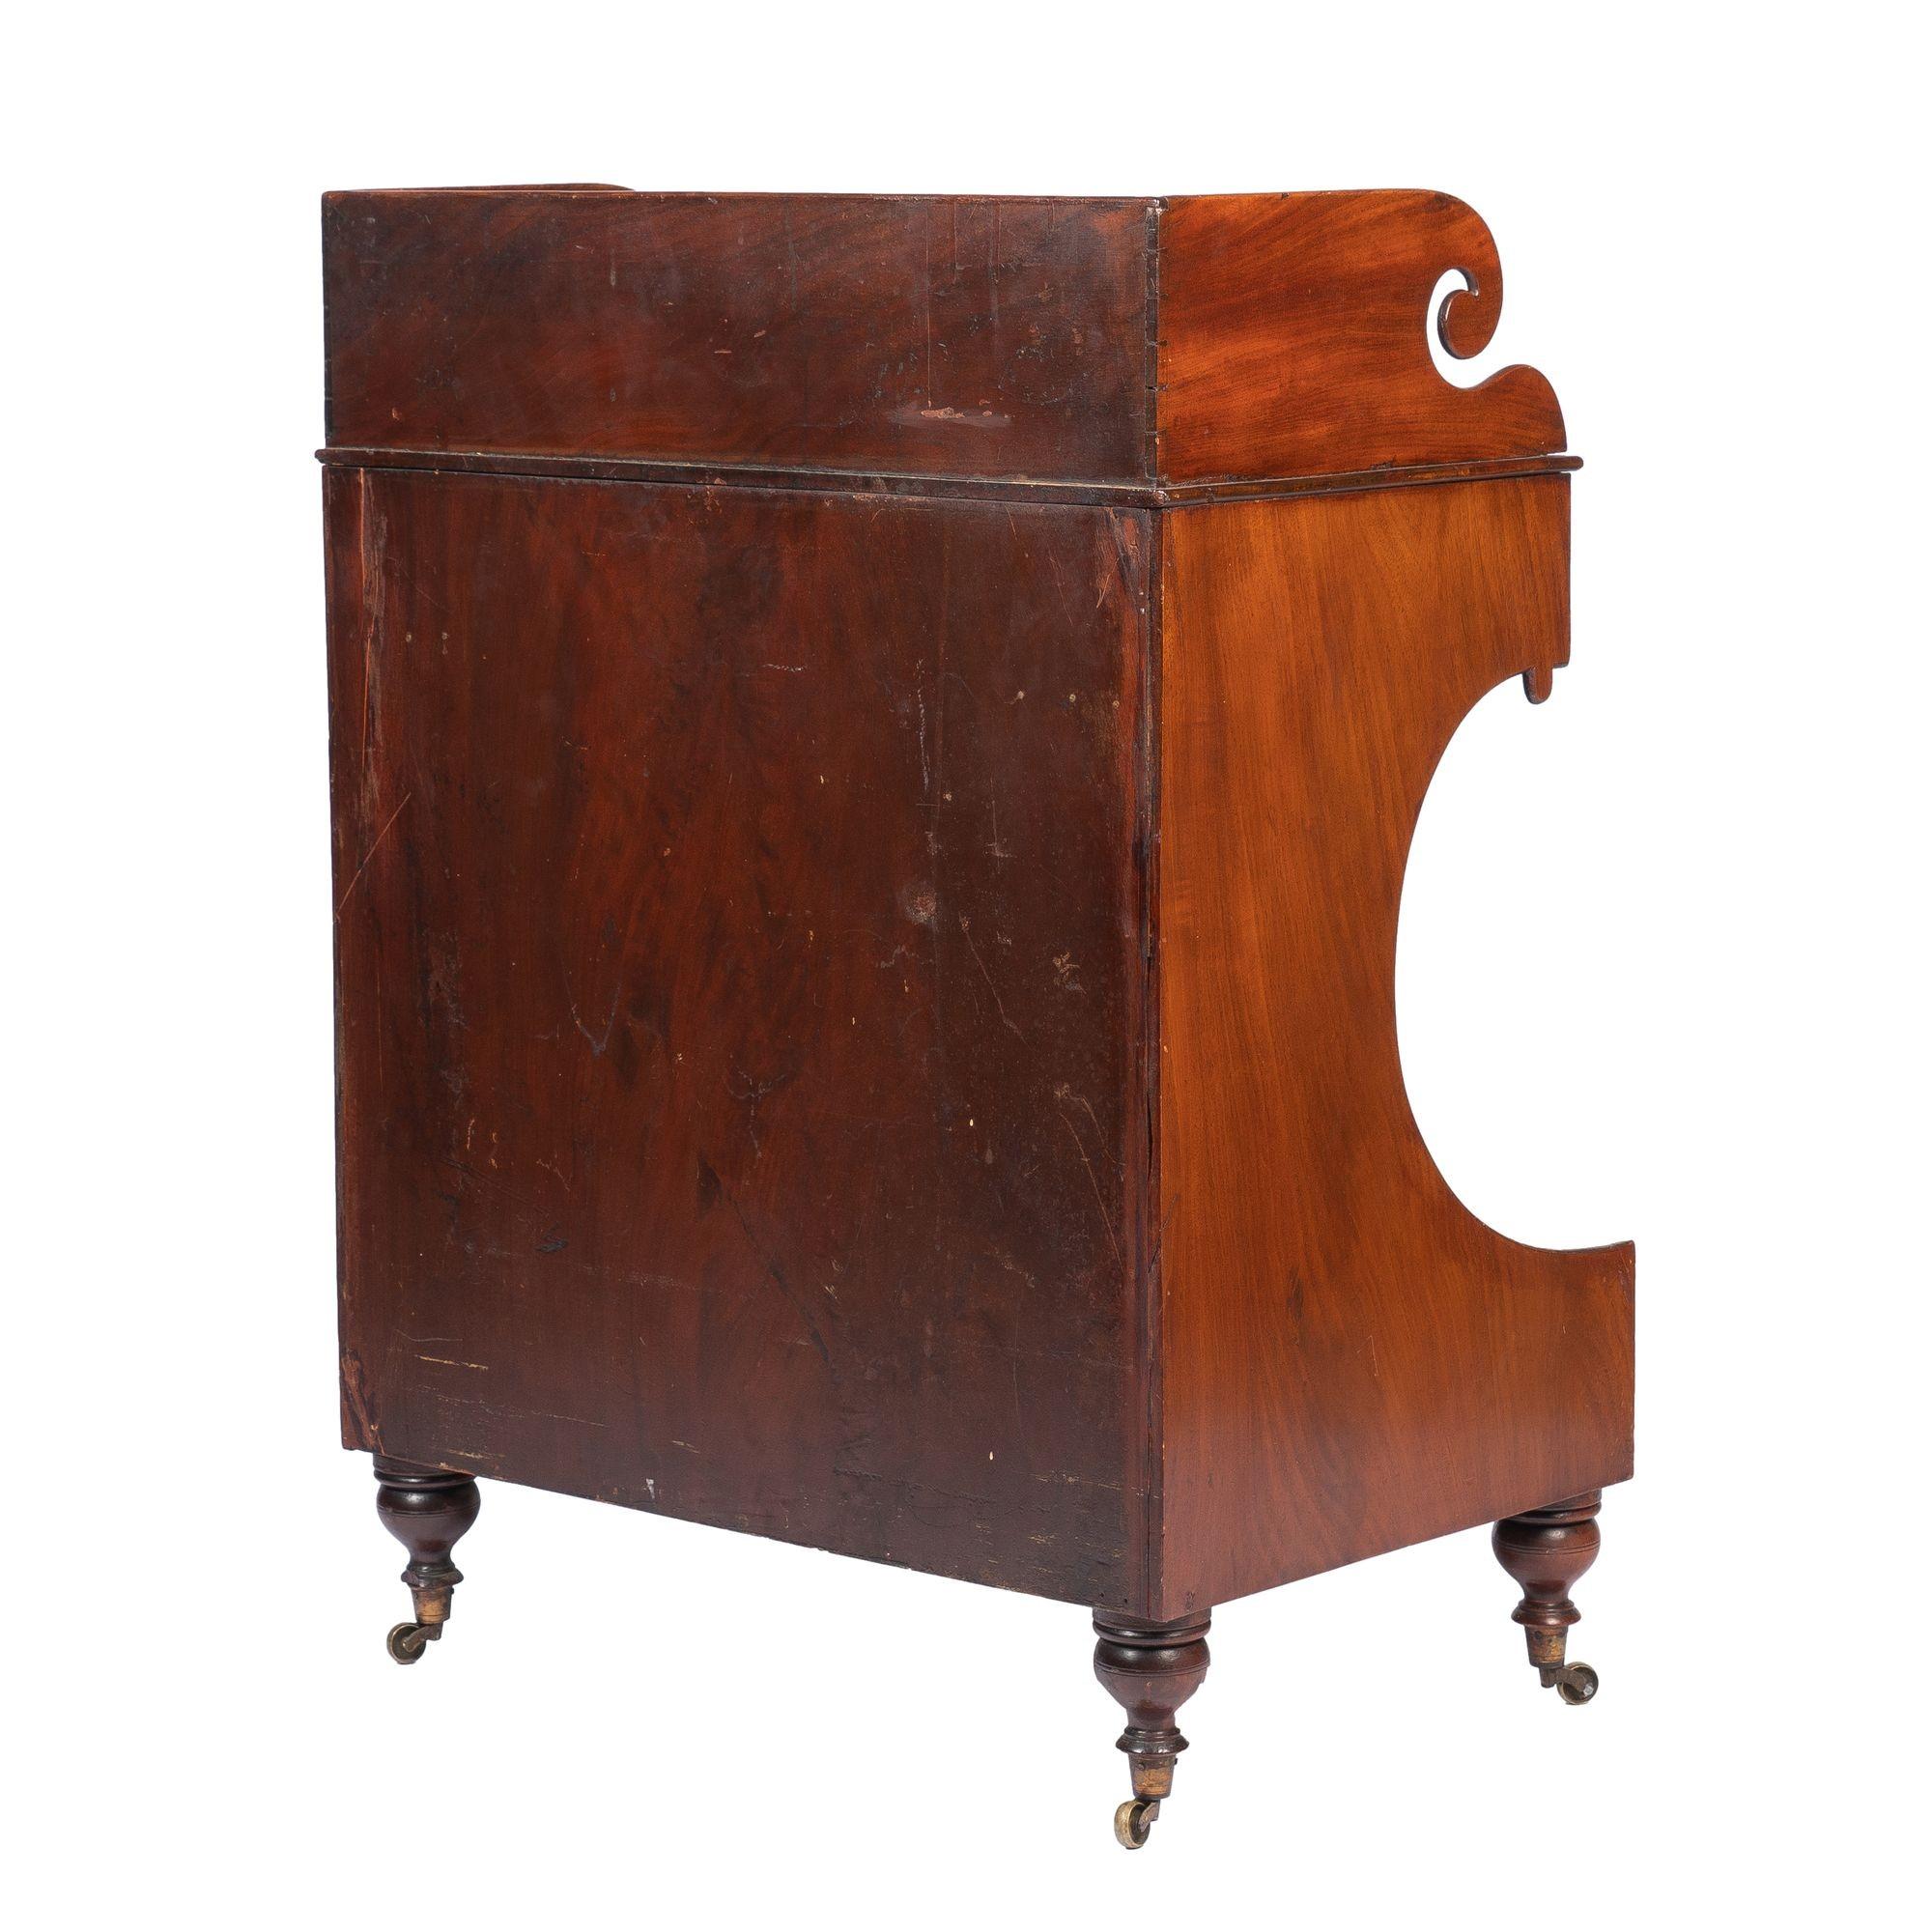 Mid-19th Century American Mahogany Demilune Dressing Stand on Brass Castors, 1830 For Sale